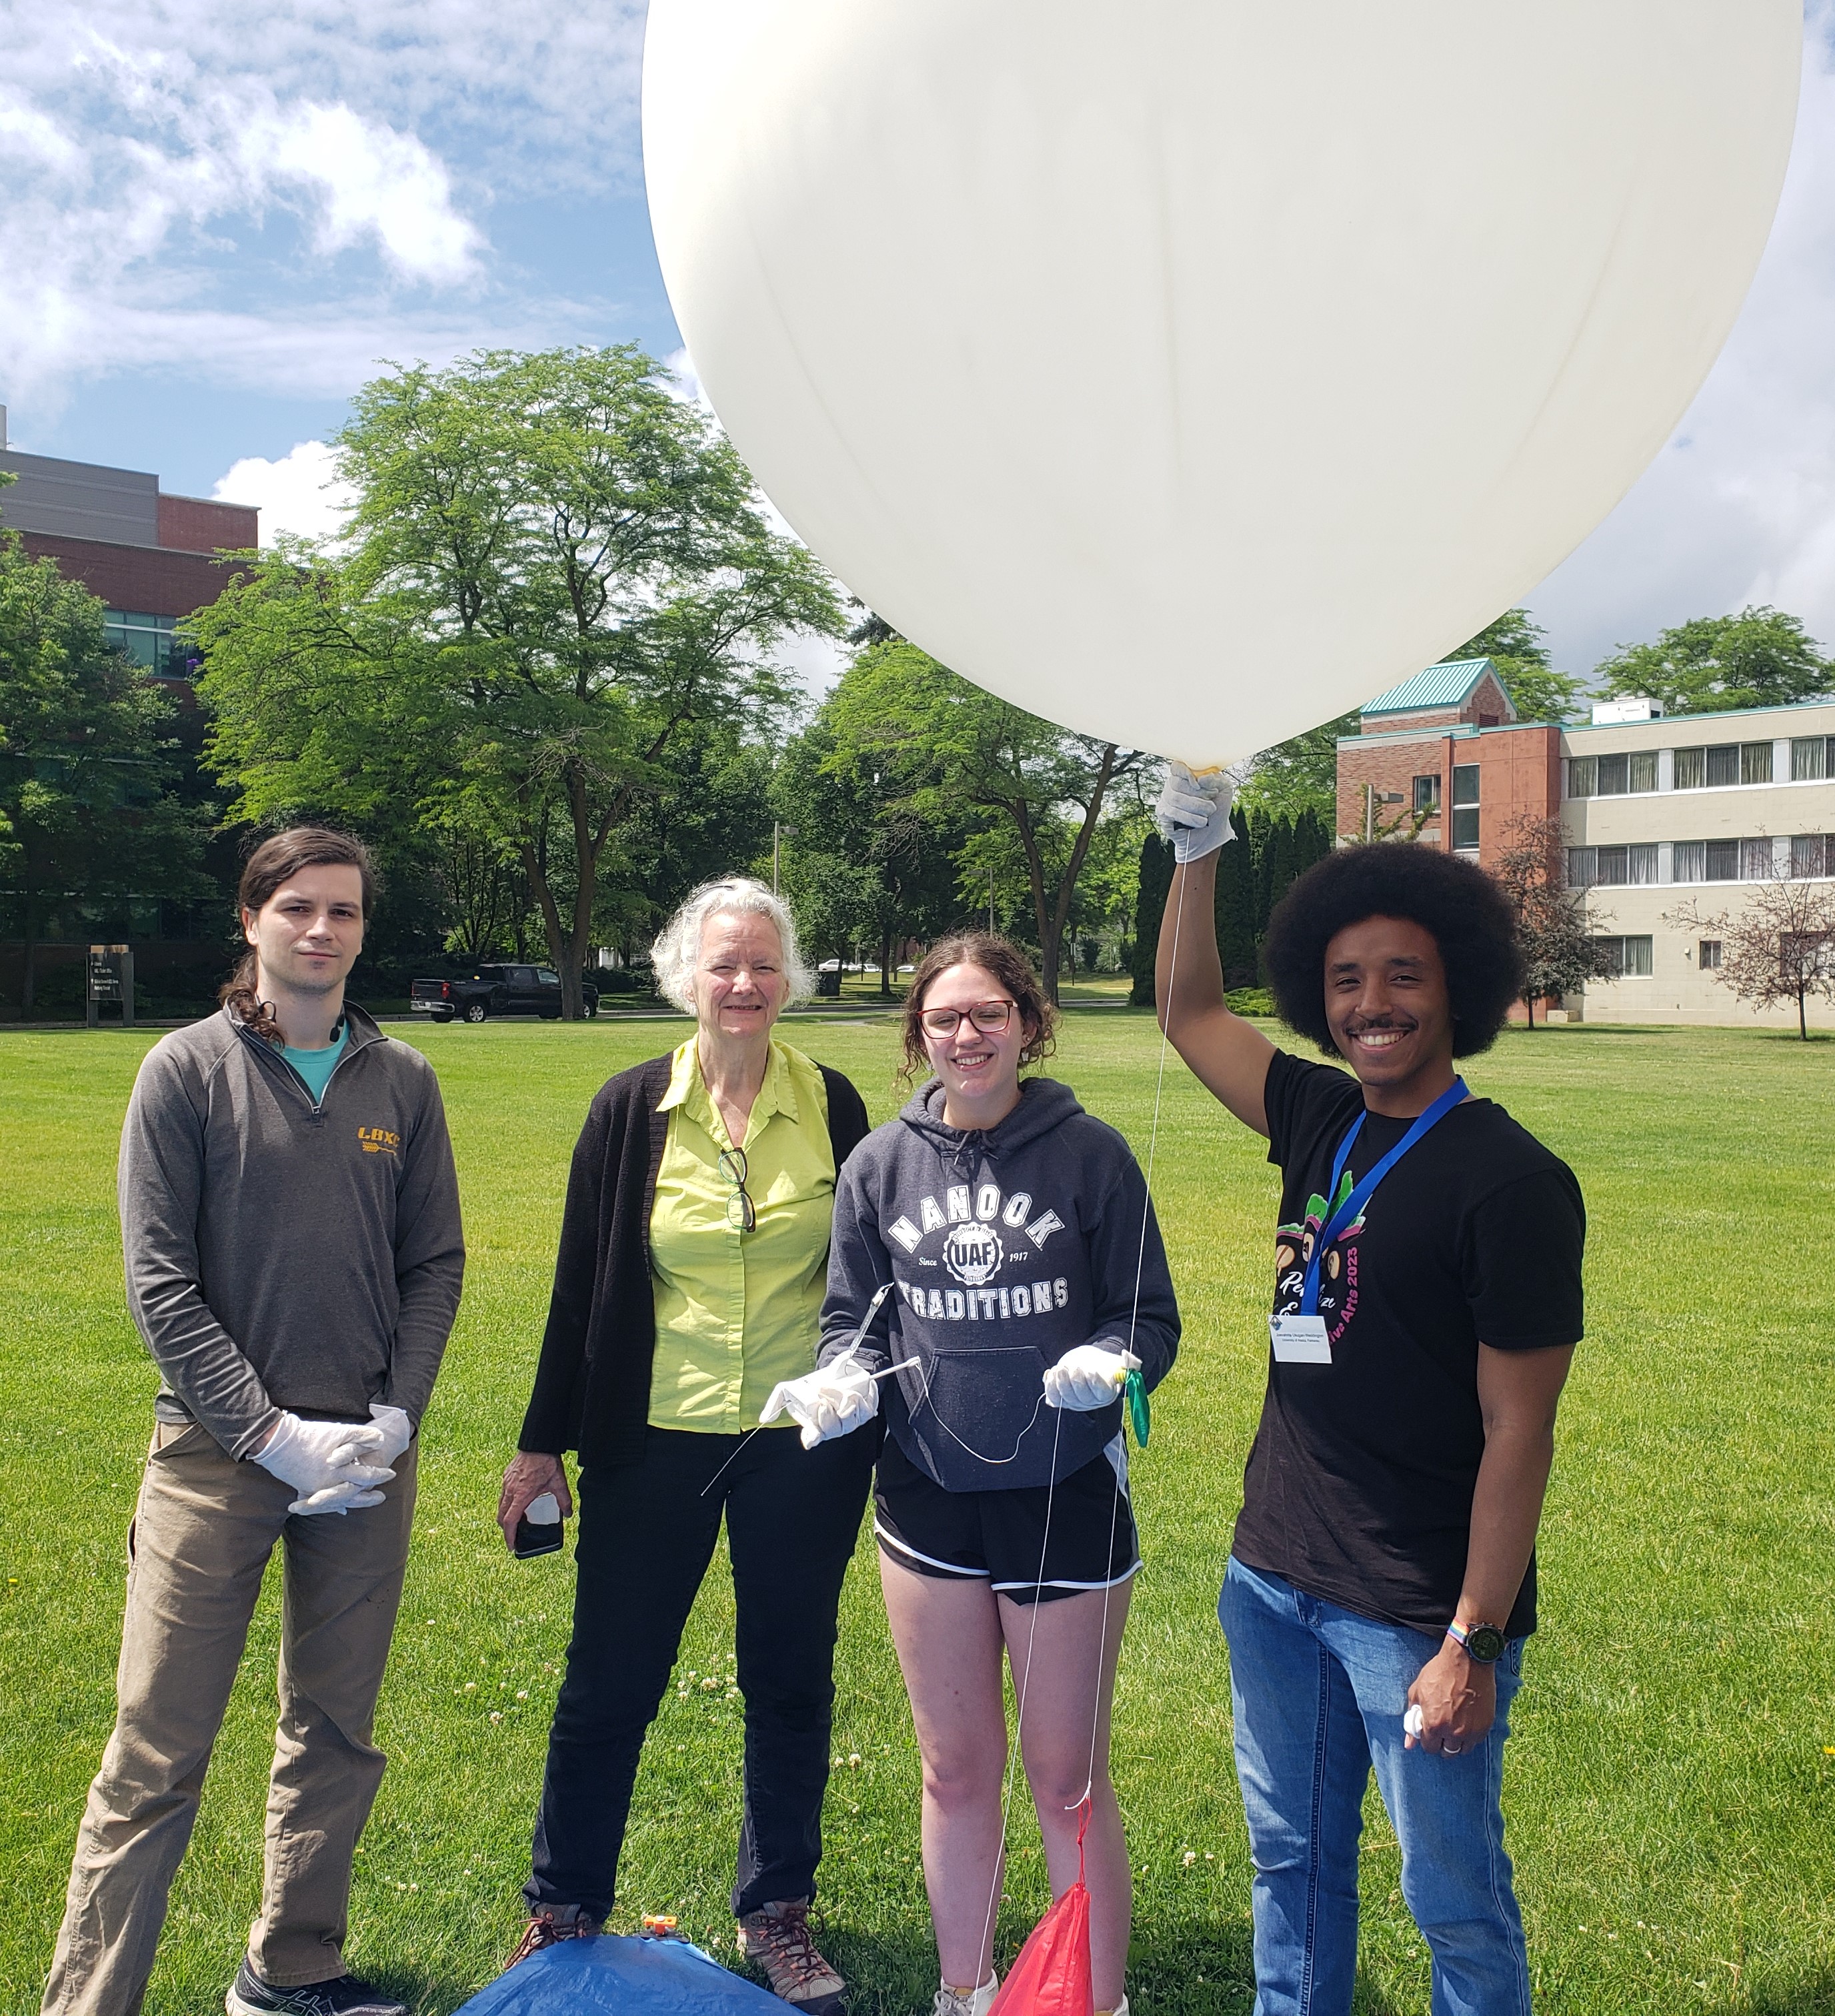 4 people stand preparring to launch a weather balloon that is about 4 feet in diameter with grass and buildings in the background